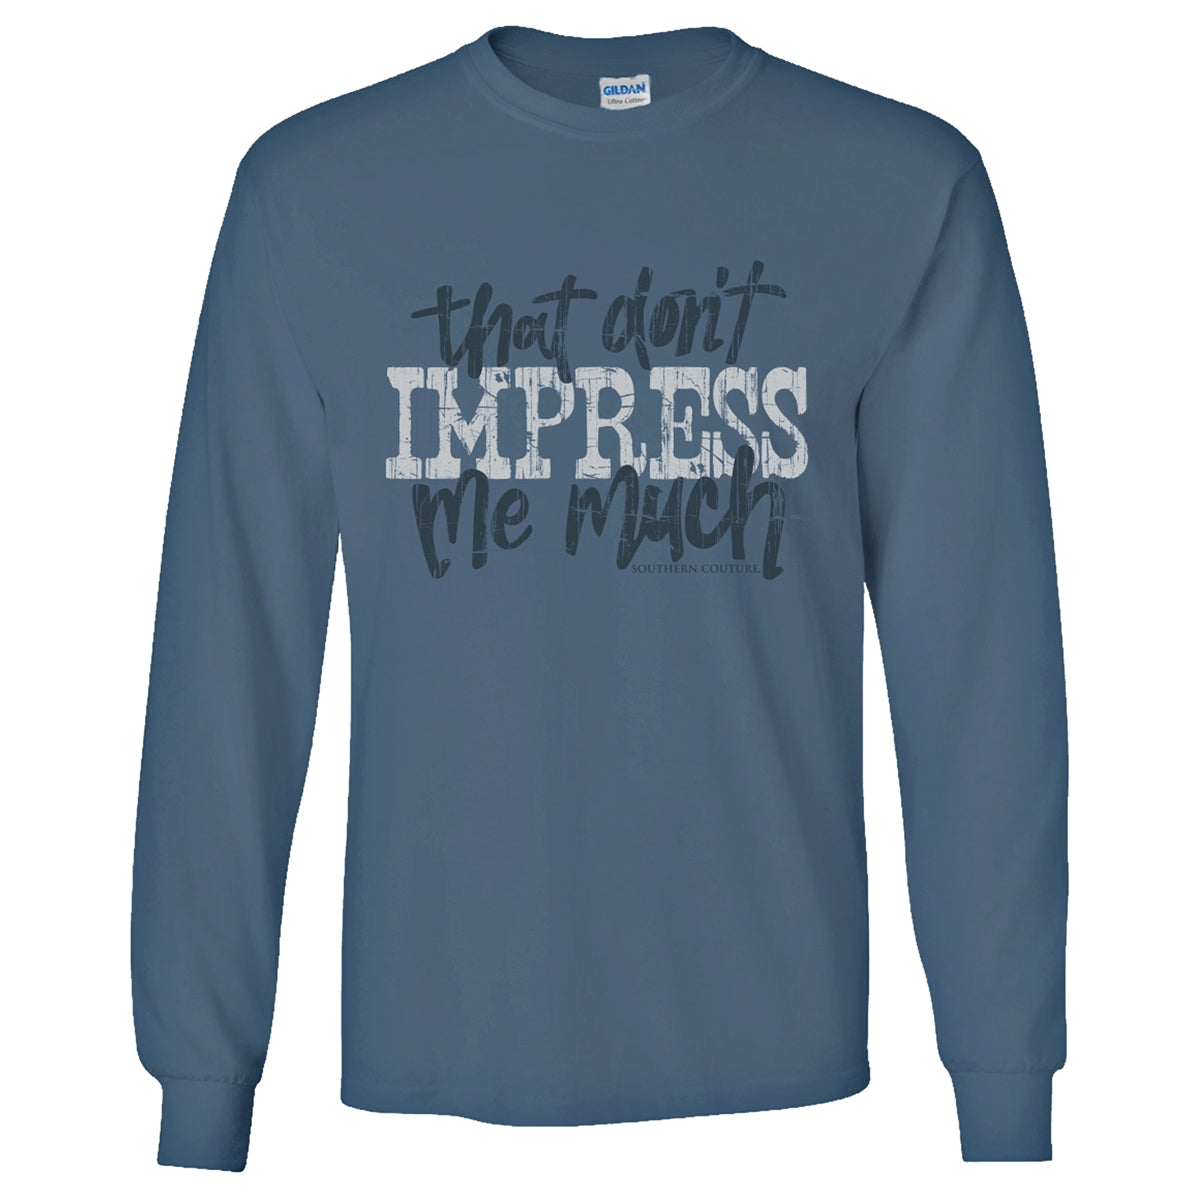 Southern Couture Don't Impress Me Much Soft Long Sleeve T-Shirt